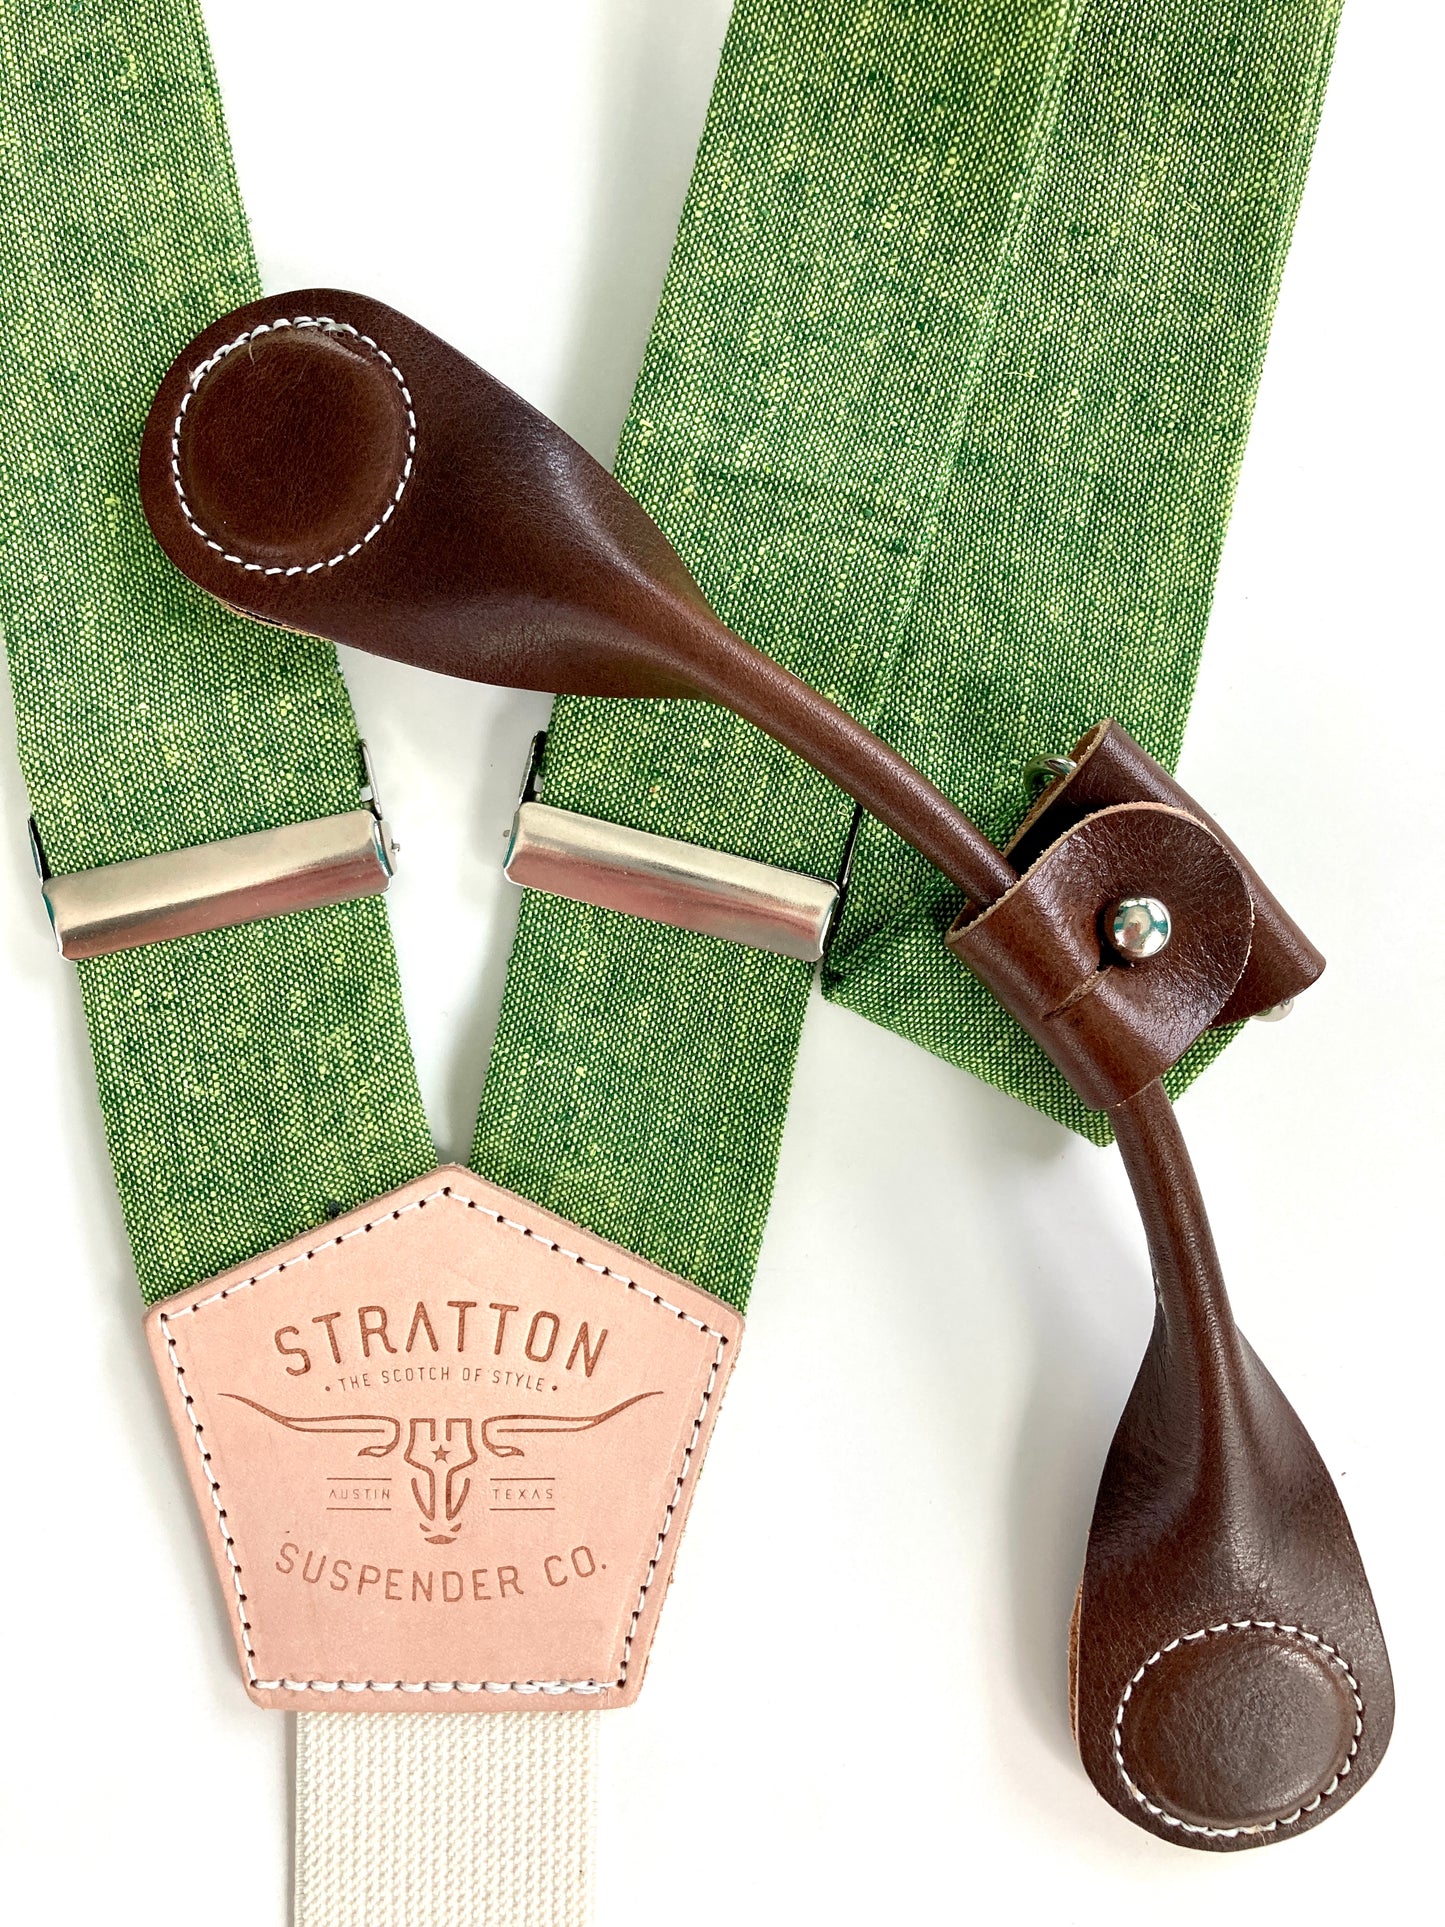 Stratton Suspender Co. features our Spruce (bright green) linen suspenders on veg tan shoulder leather with cream colored elastic back strap for the Fall 2022 suspenders collection Magnetic Stratton Suspender clasps in Chocolate Pontedero Italian leather hand-picked by Stratton Suspender Co